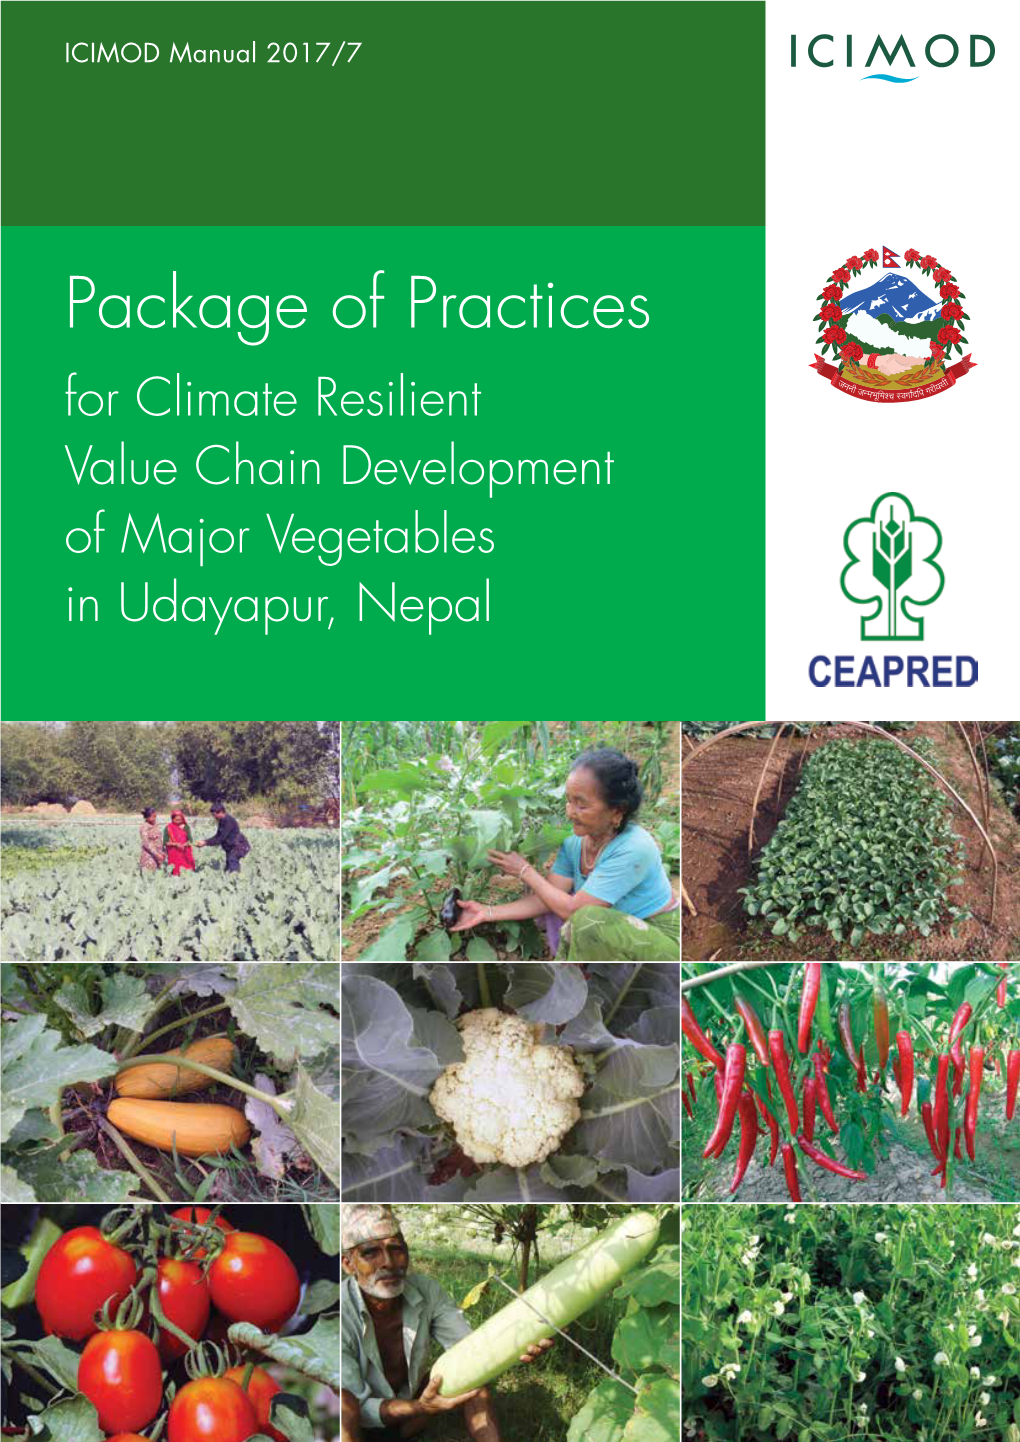 Package of Practices for Climate Resilient Value Chain Development of Major Vegetables in Udayapur, Nepal About ICIMOD